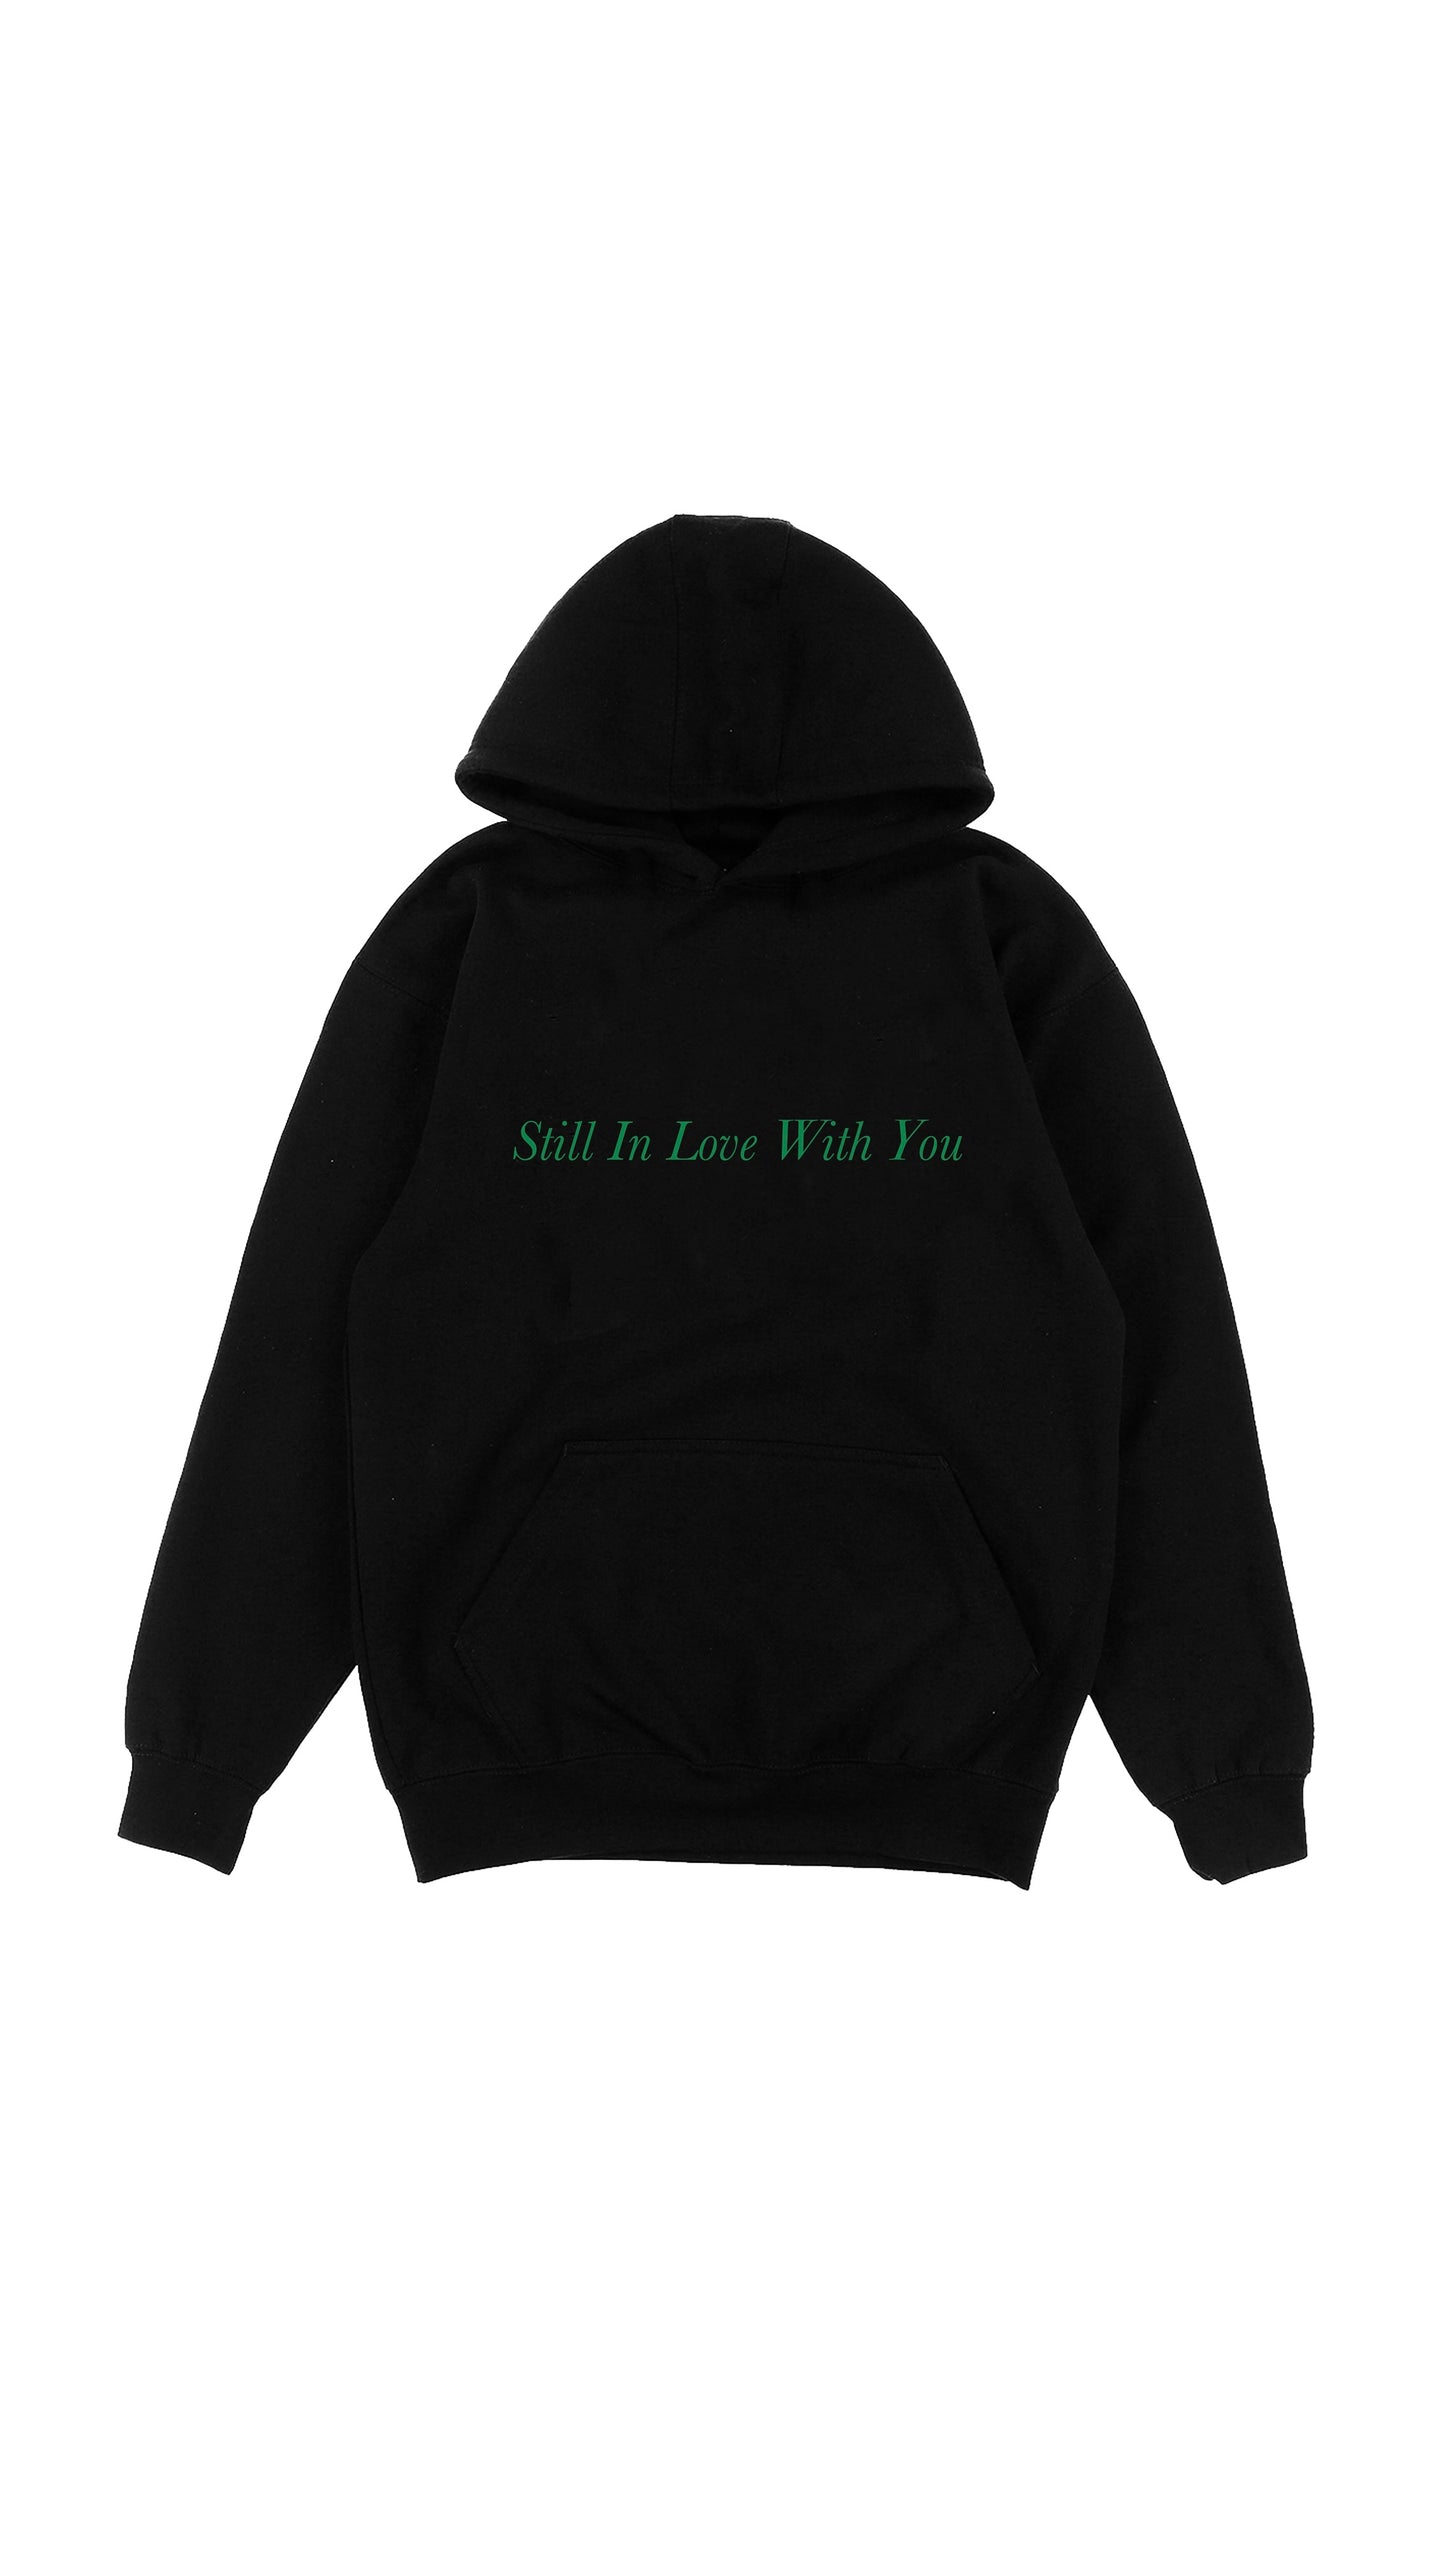 Still in love with you hoodie